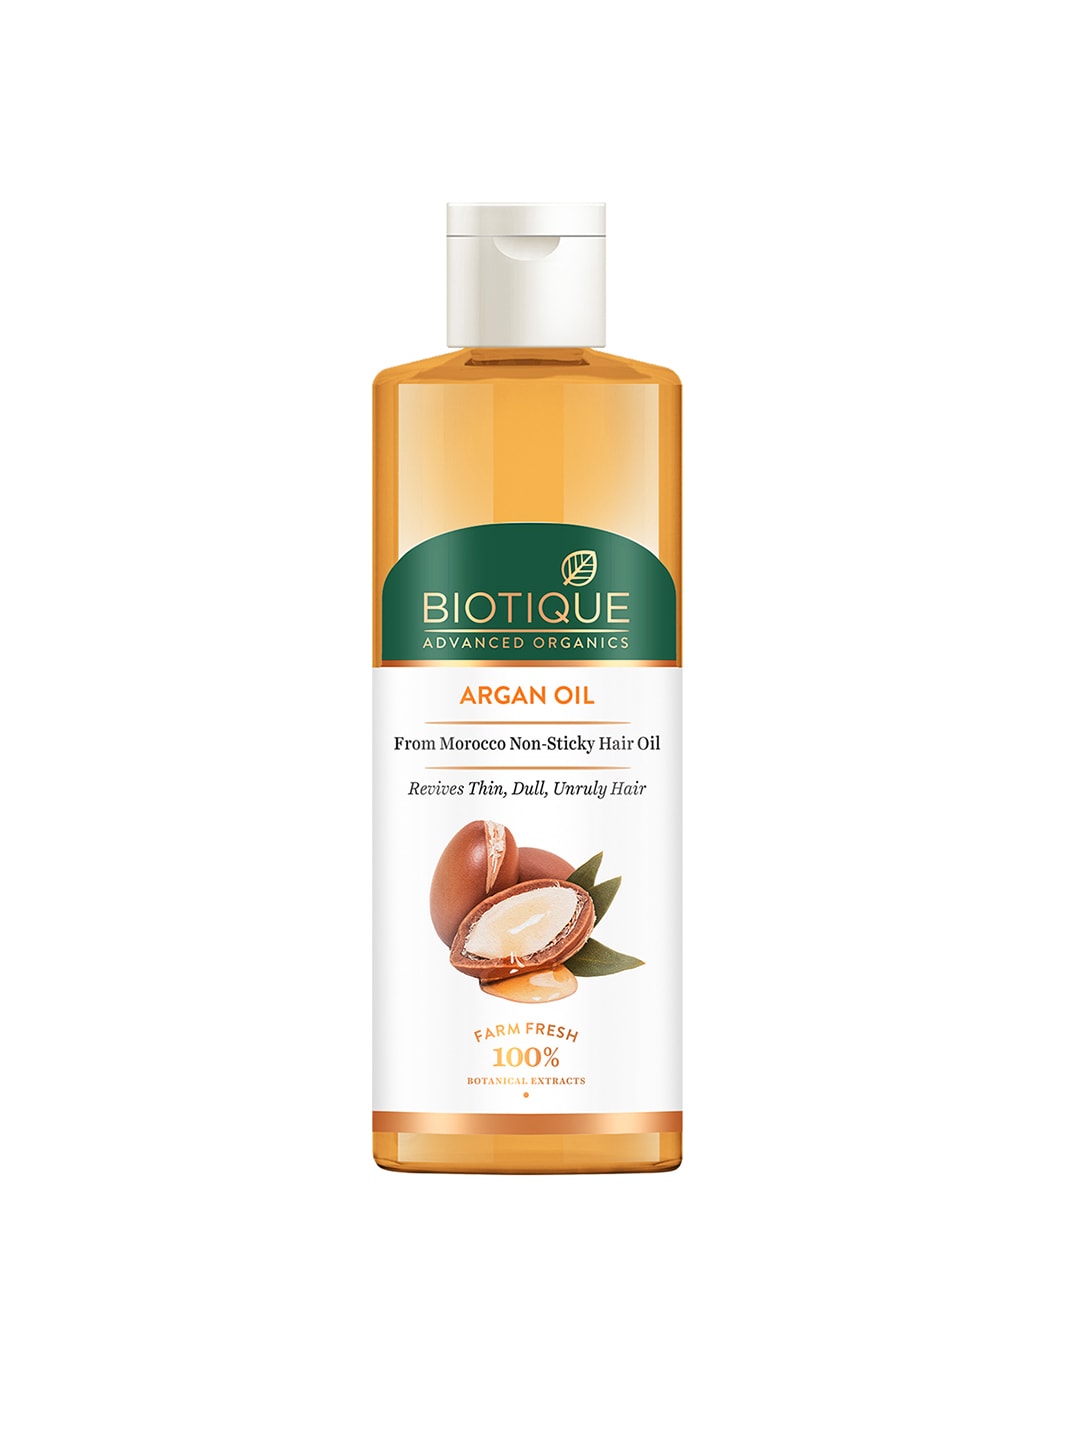 Biotique Unisex Advanced Organics Argan Oil From Morocco Non-Sticky Hair Oil 200 ml Price in India